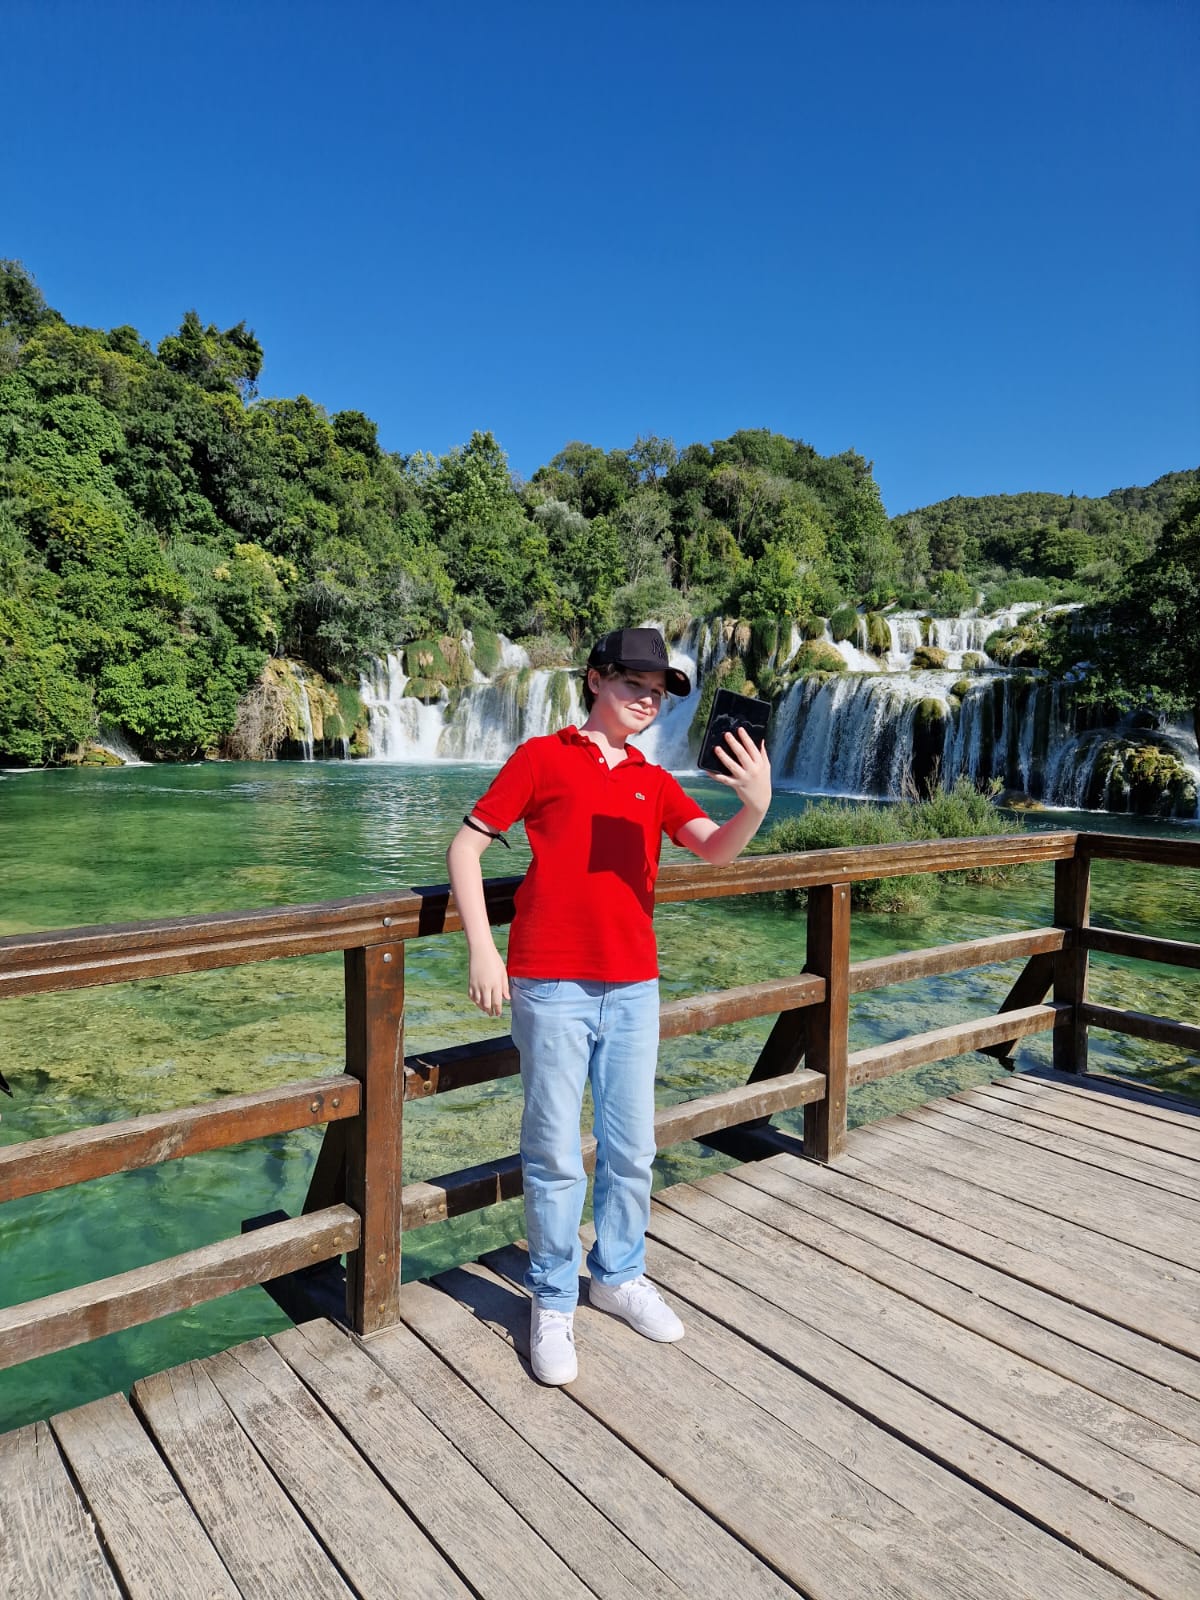 'The smartest kid in the world' (13) arrives in Croatia